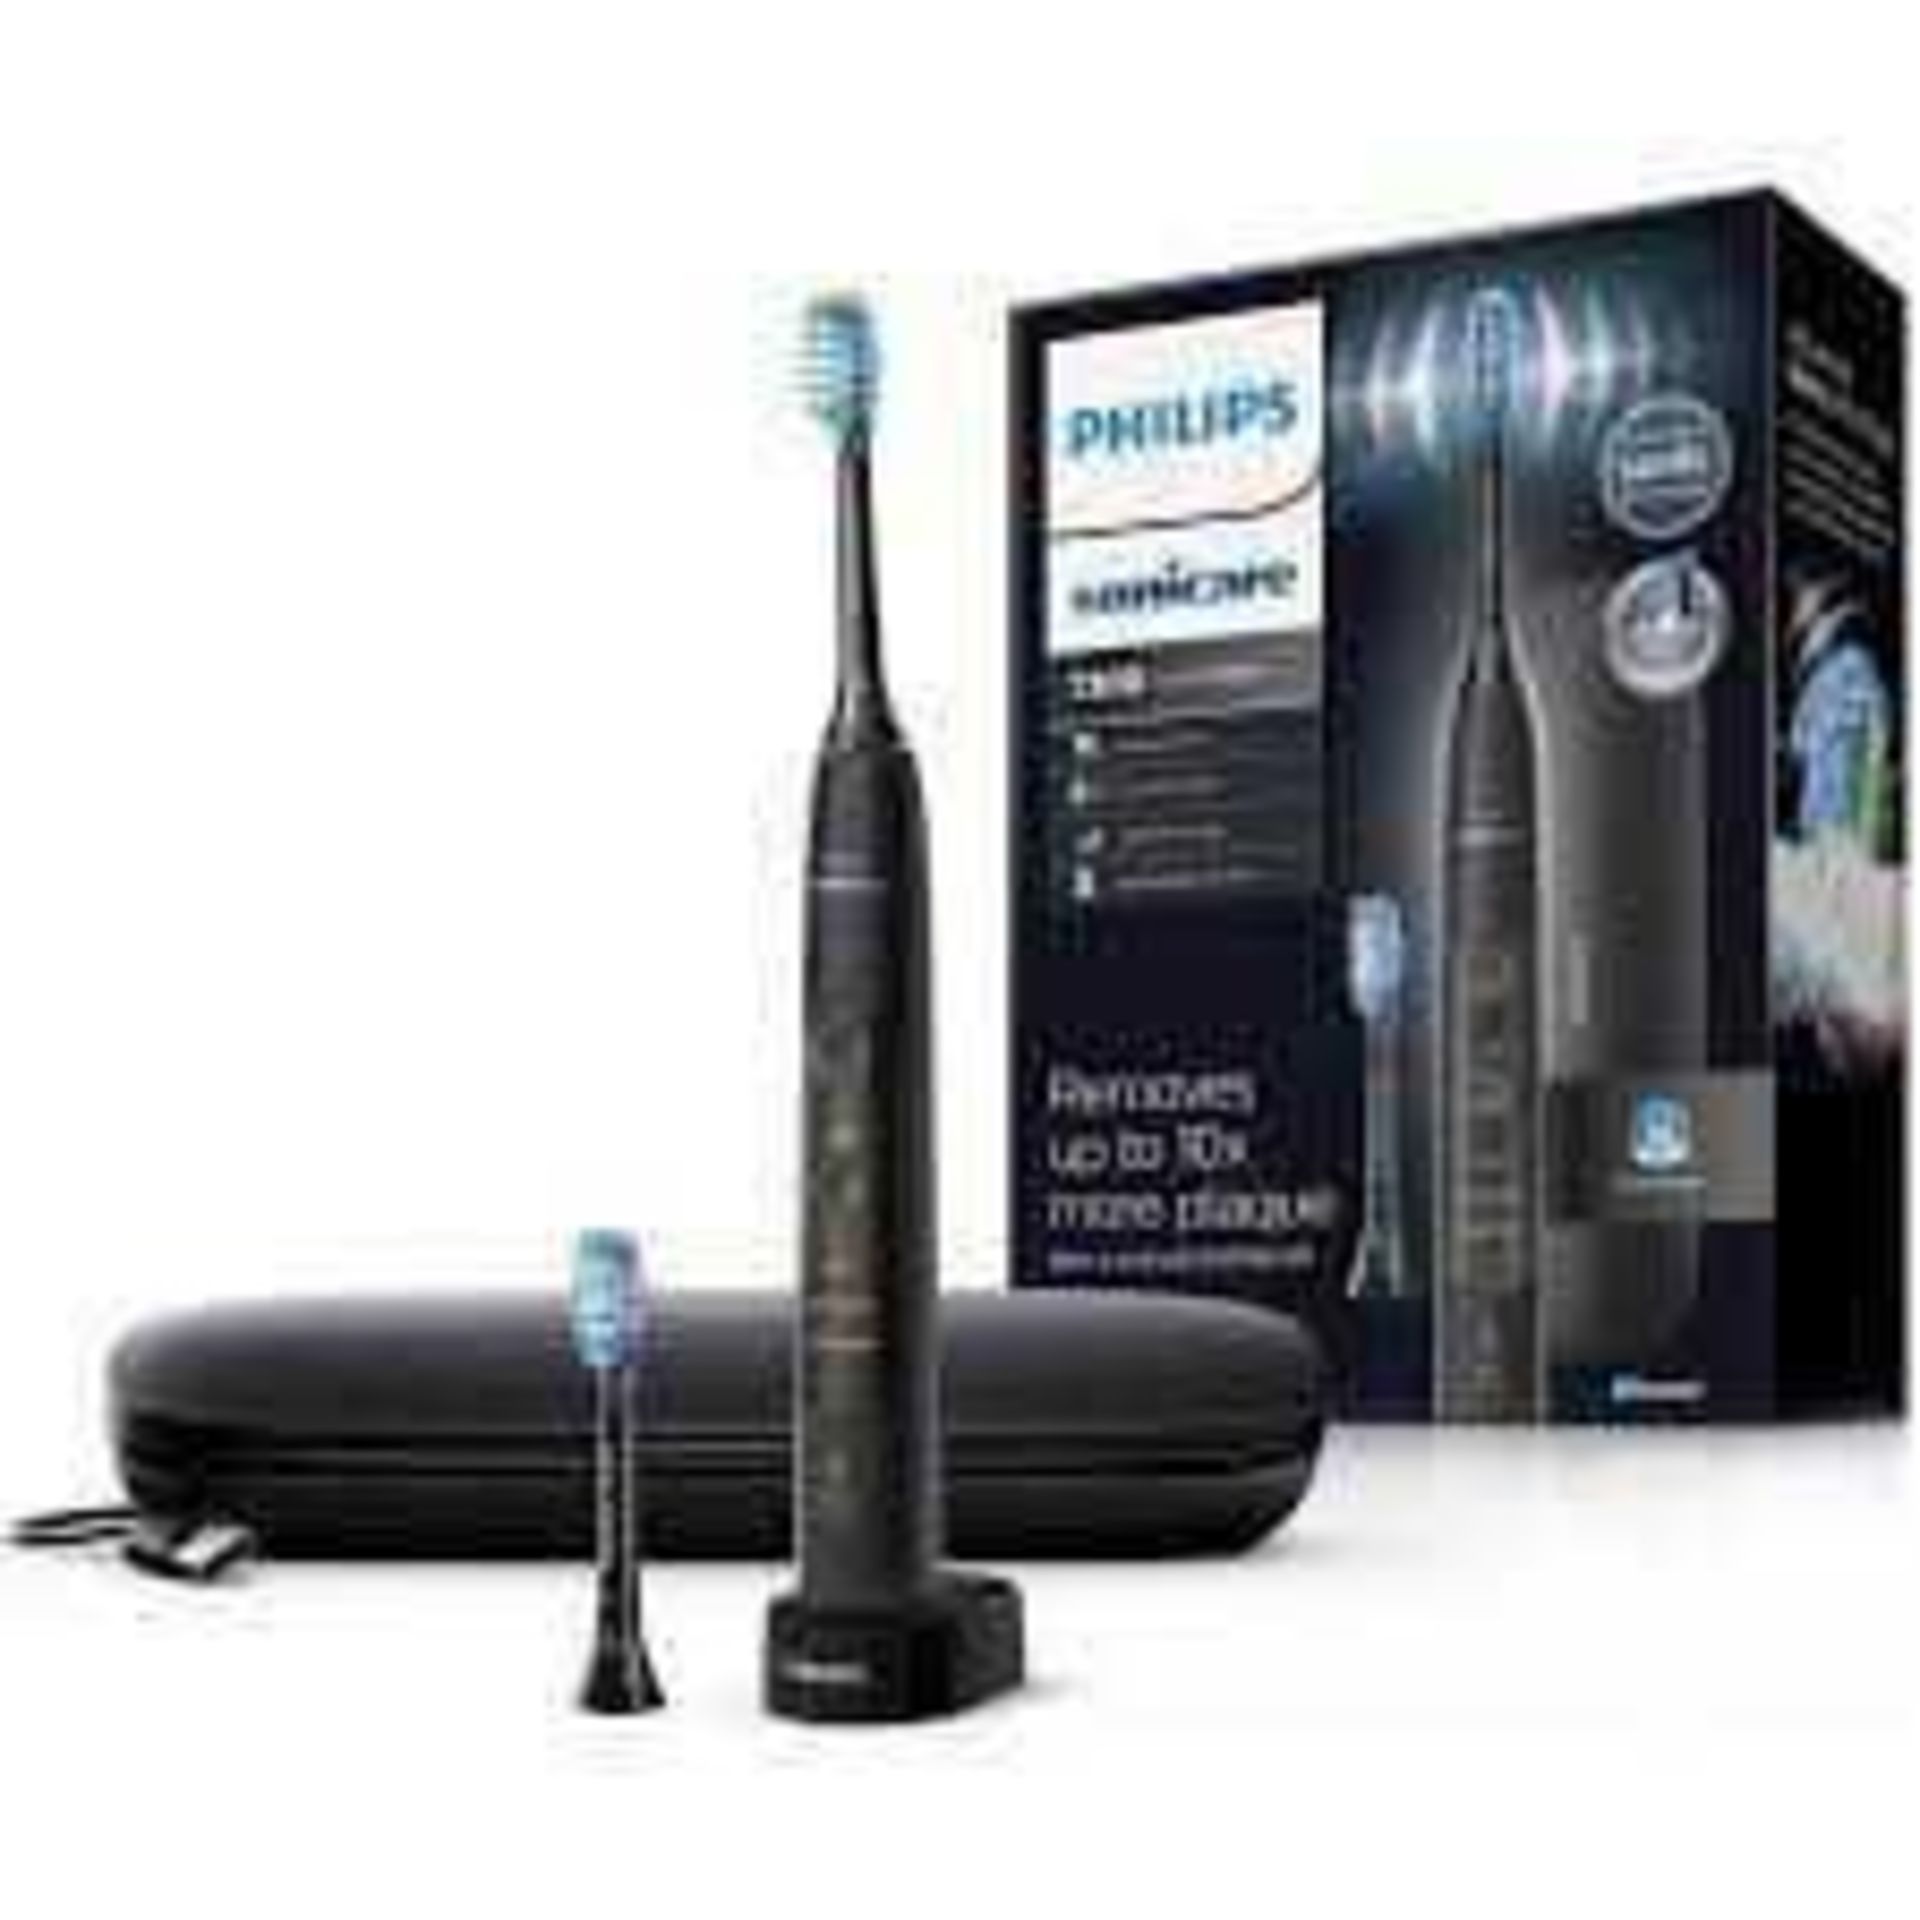 RRP £160 Boxed Philips Sonicare Hx9611/22 7300 Expertclean Electric Toothbrush, Black(Sp) - Image 2 of 2